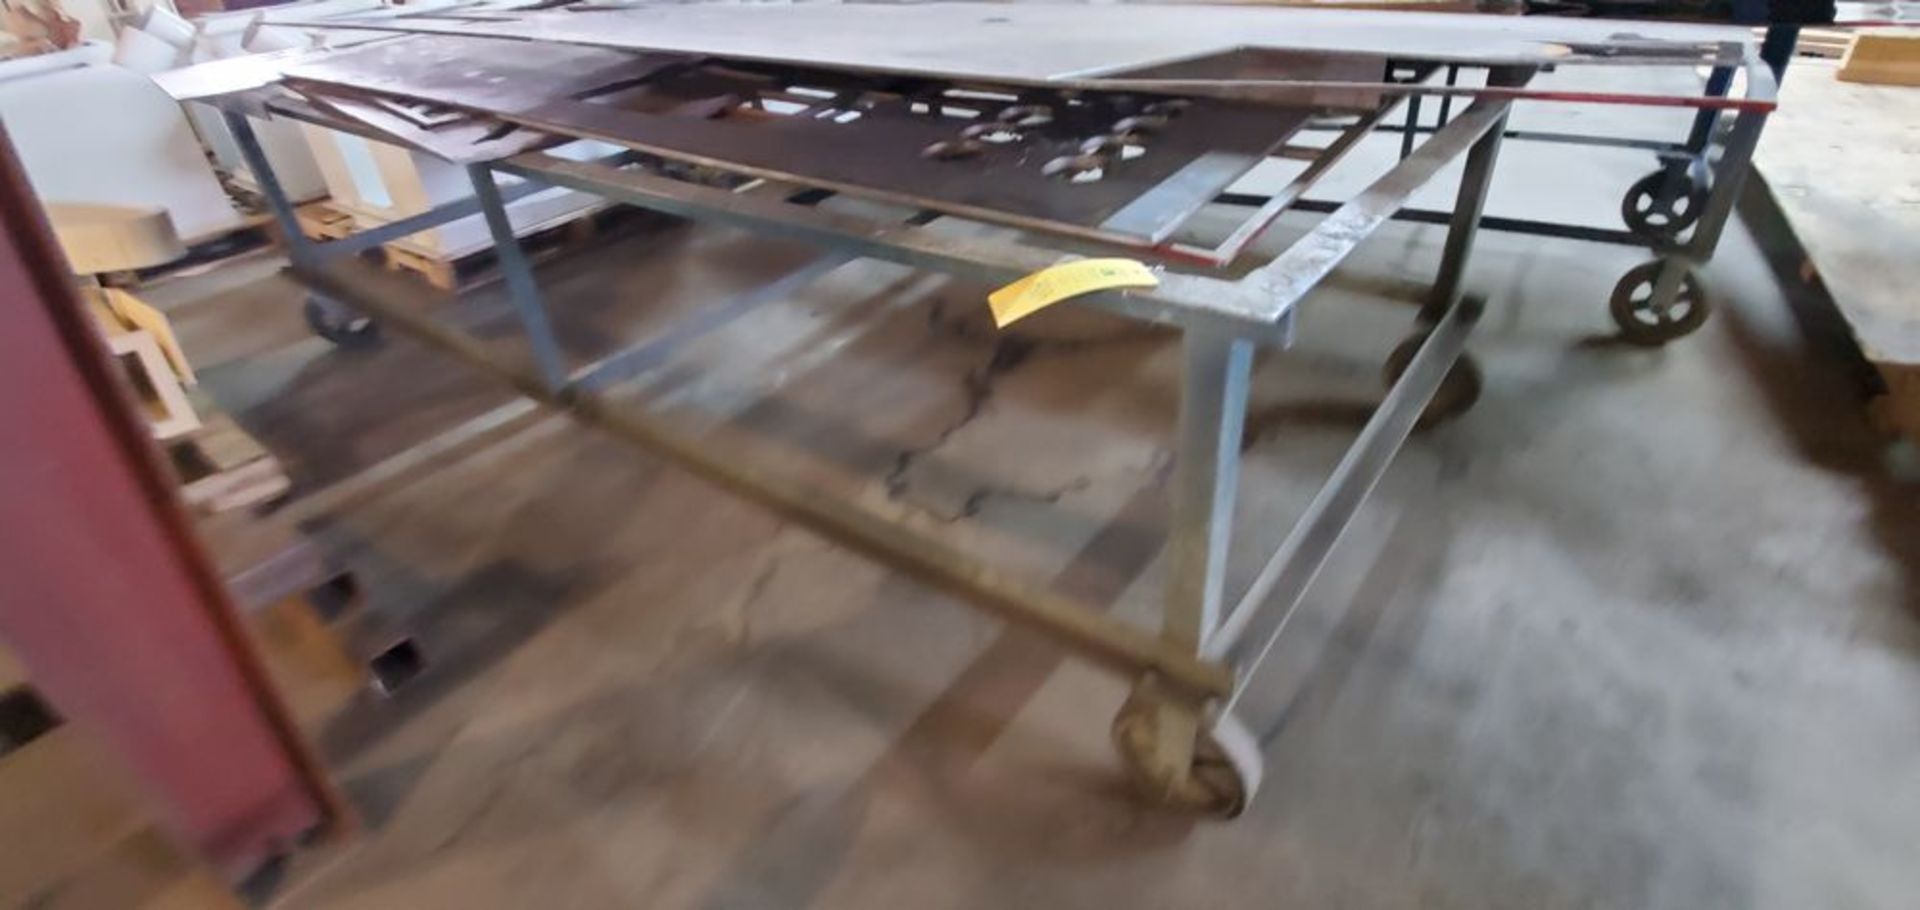 Located in Canon City, CO -- Heavy Duty Rolling Table for steel, mounted on wheels, approximately - Image 2 of 2